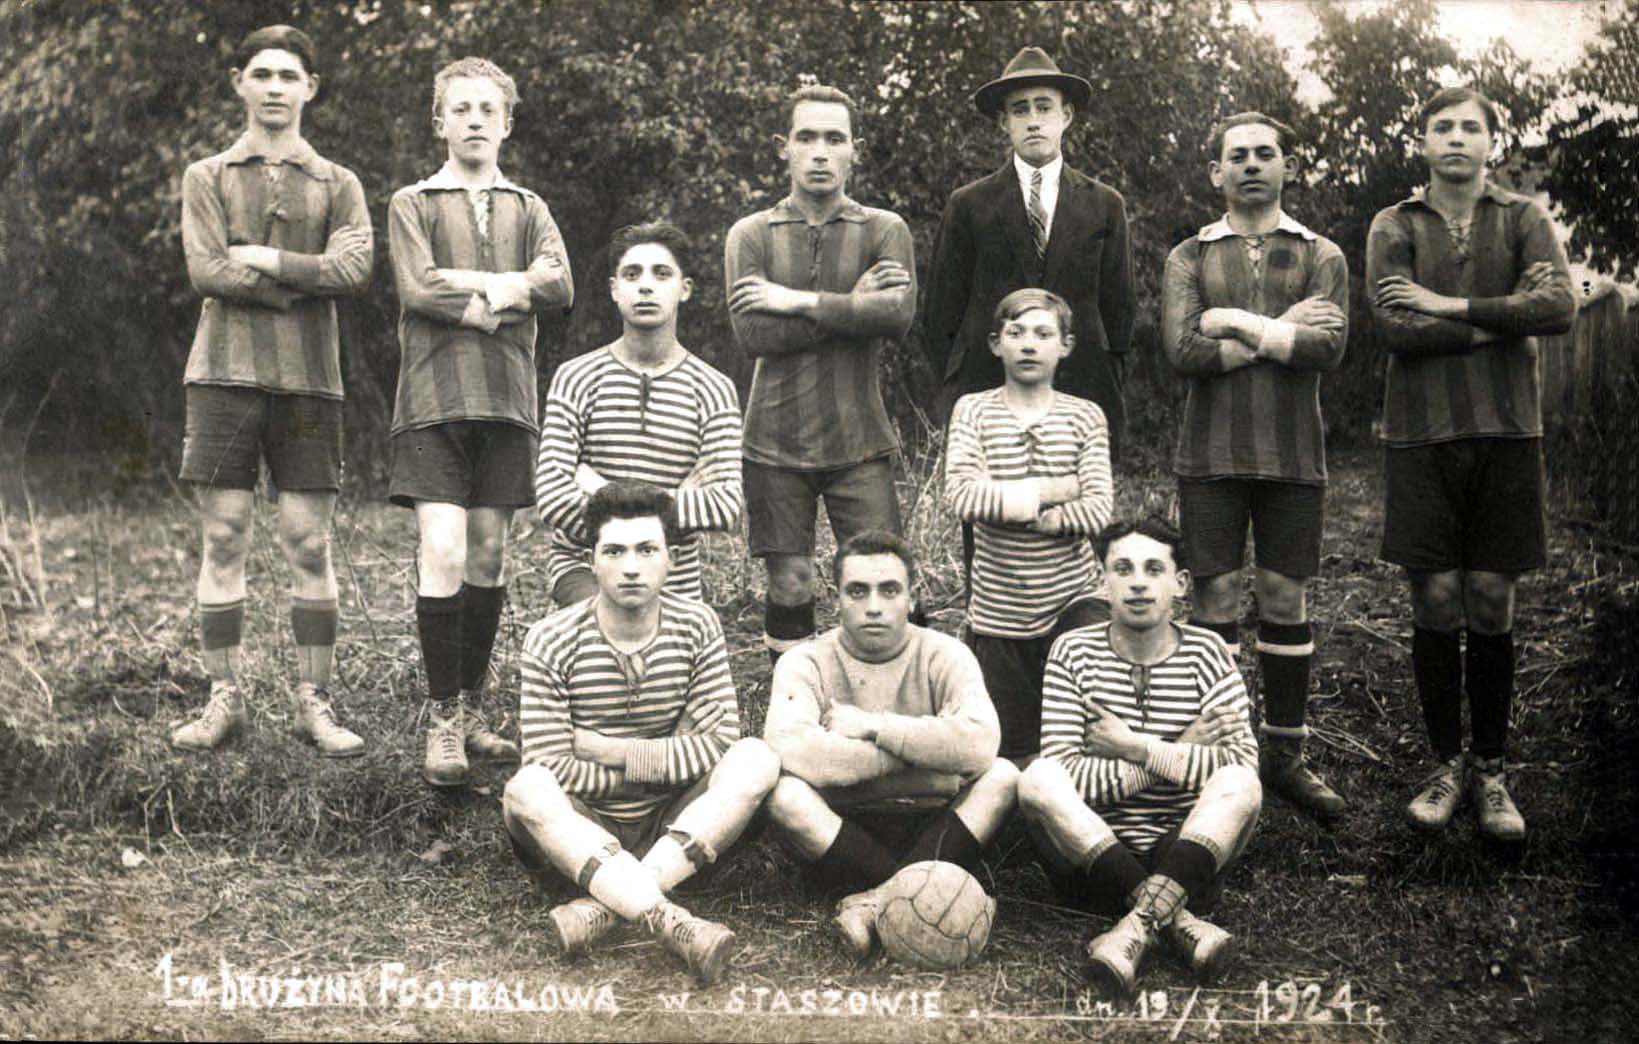 Staszow, Poland, a group photo of the Soccer team members, 19/10/1926